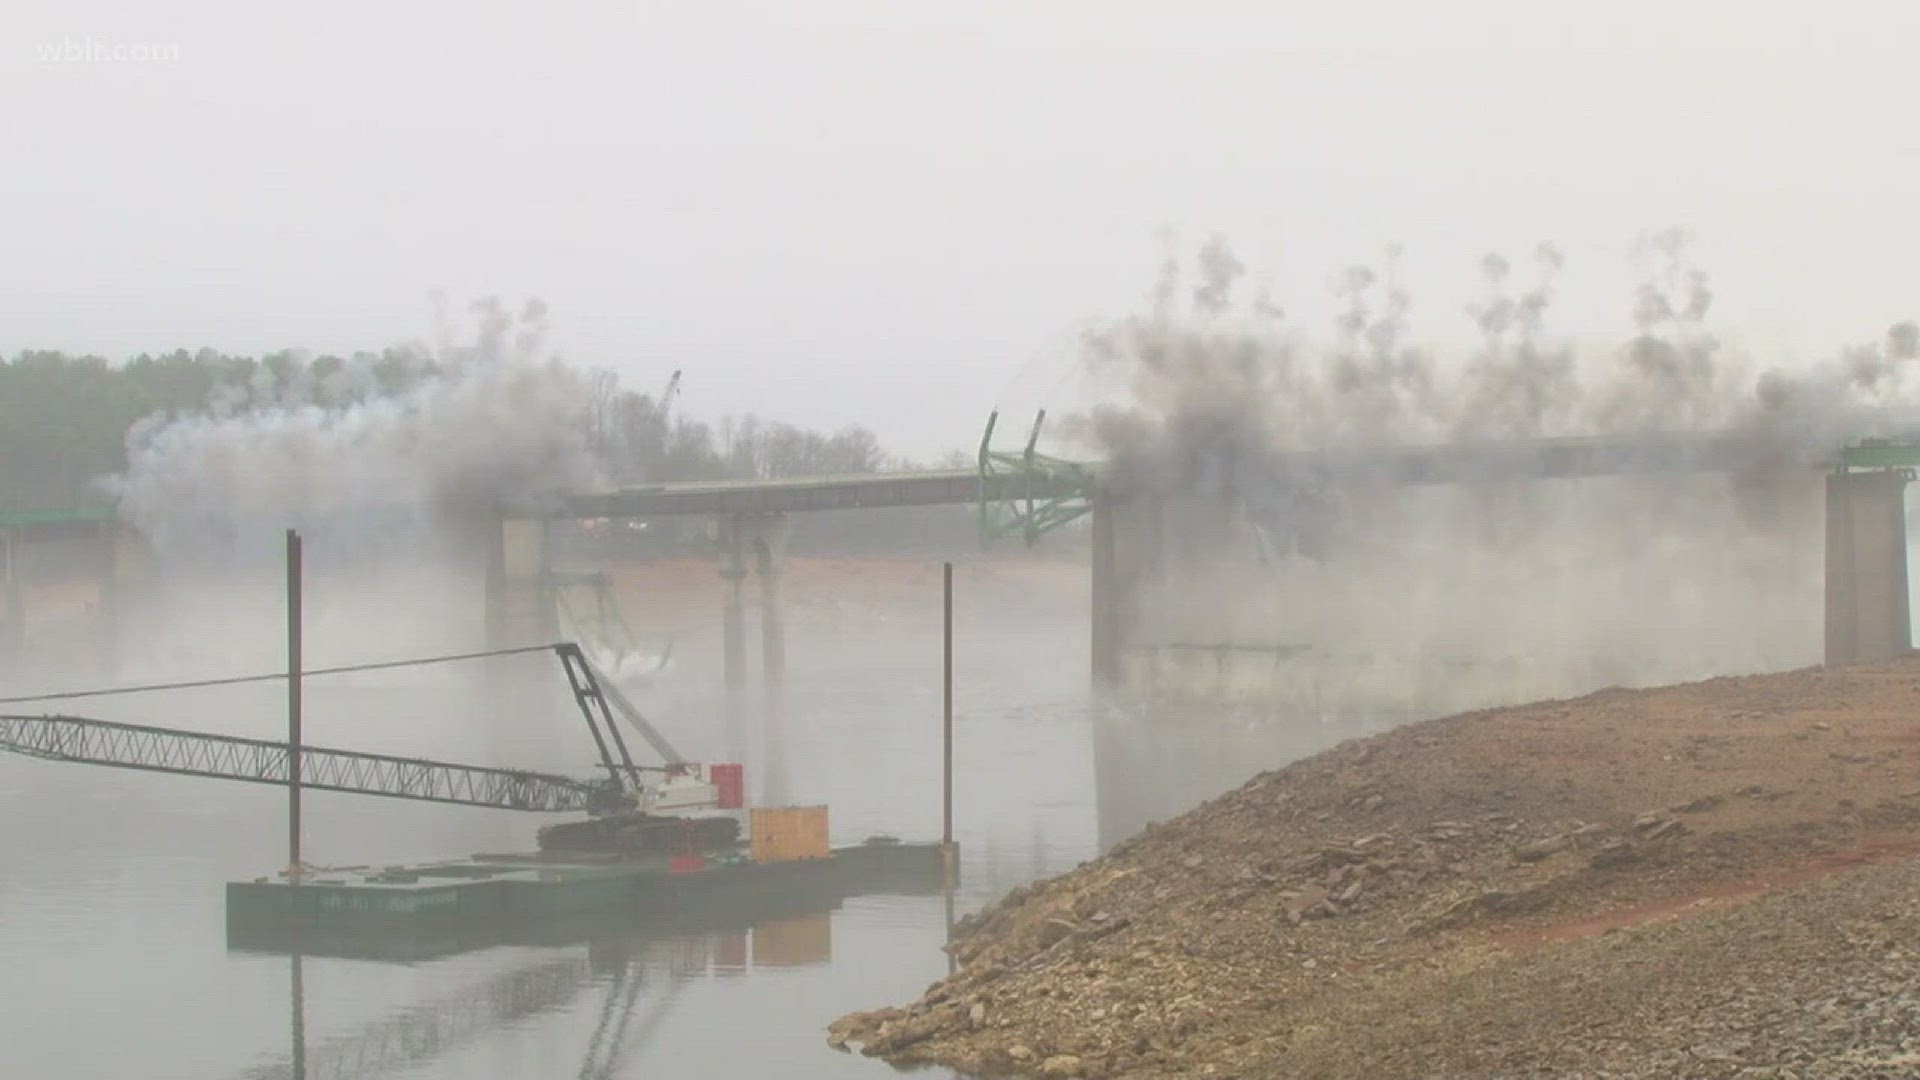 The town of Dandridge lost a 70-year-old fixture with the demolition of the Green Bridge.